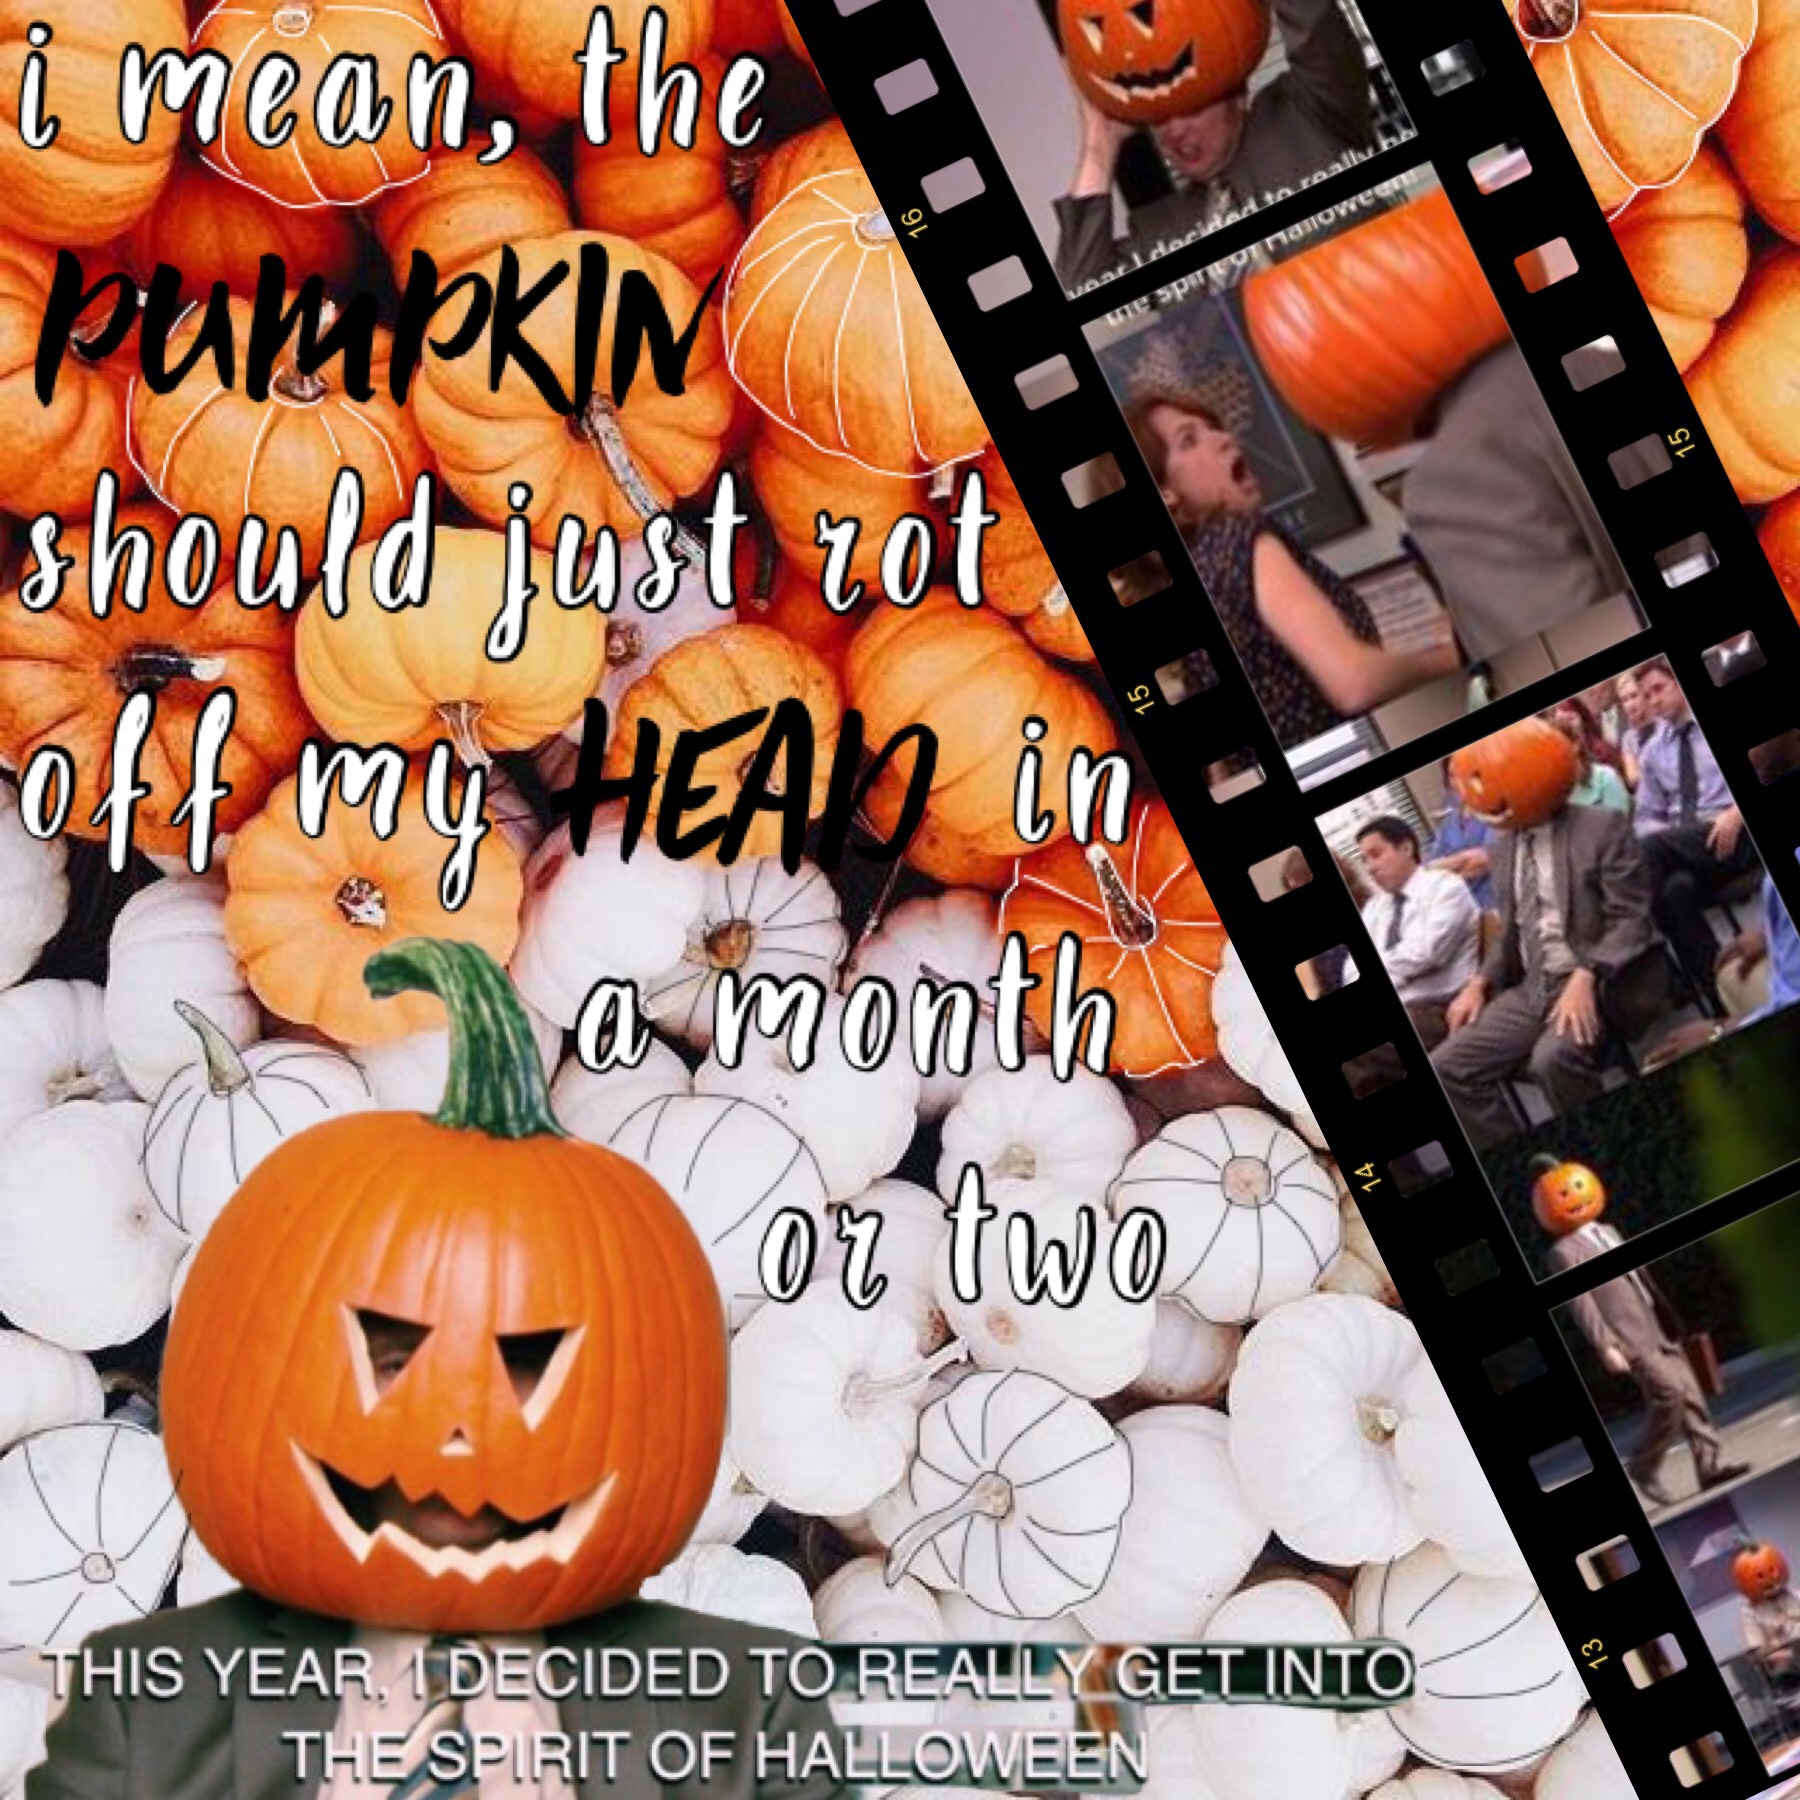 🎃 t a p 🎃
as you can see, I’m obsessed with the office. and halloween

qotd: what are you being for Halloween?
aotd: a Greek goddess (I’ll post a pic) 